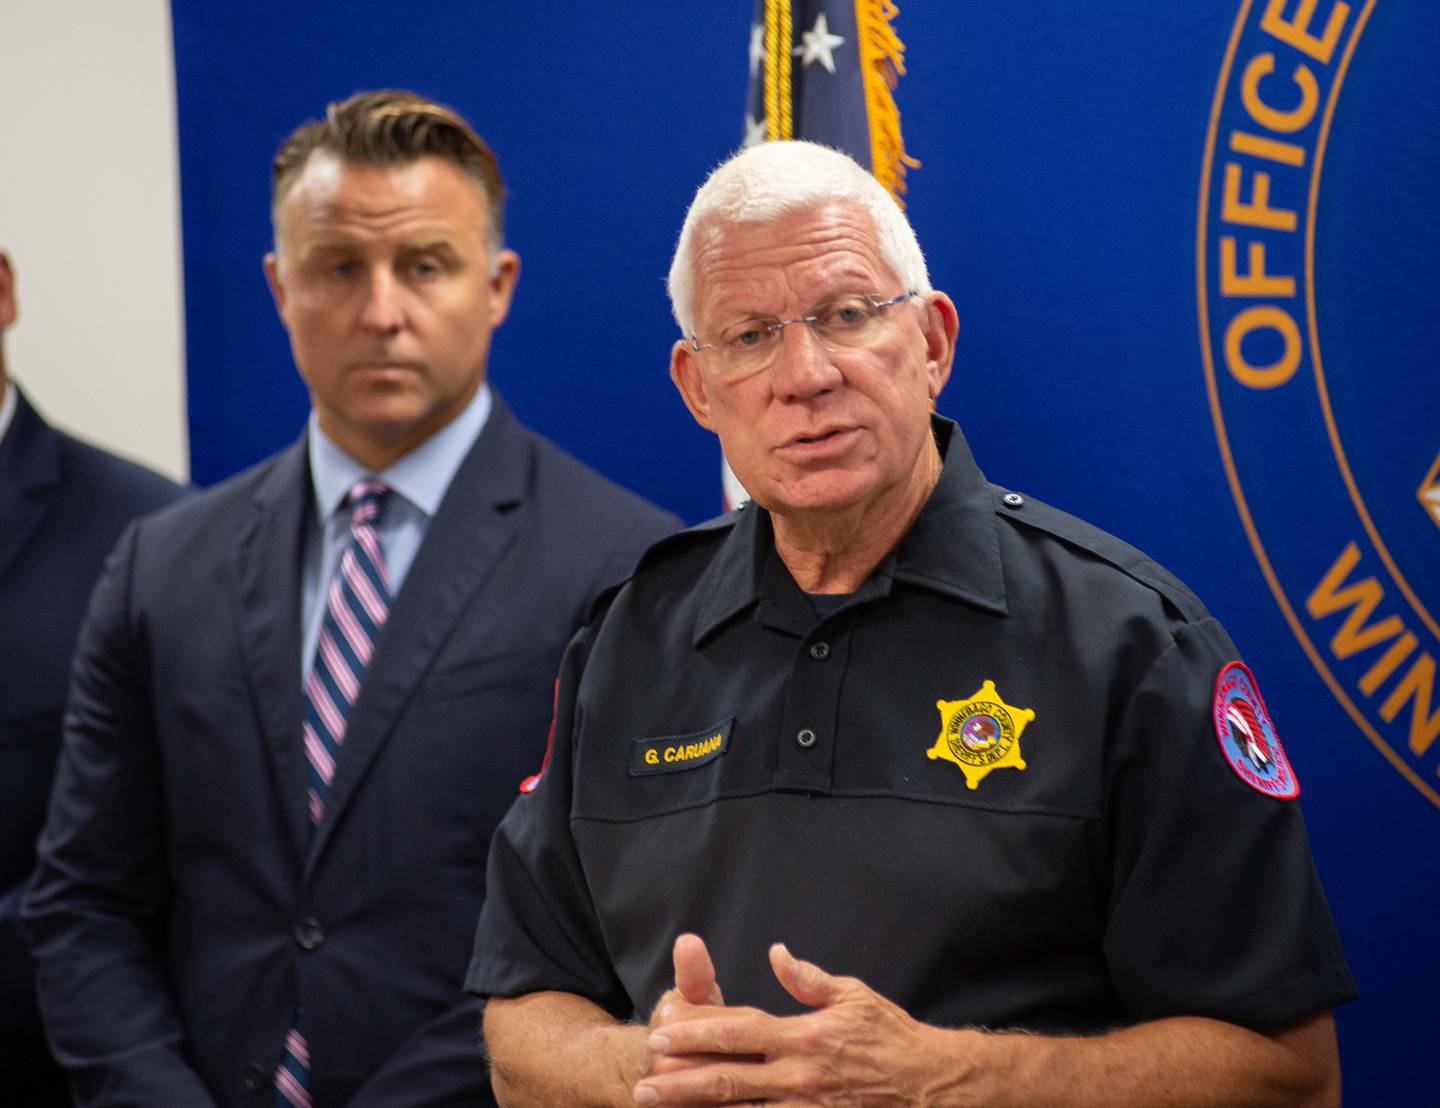 Winnebago County State's Attorney J. Hanley, left, and Winnebago County Sheriff Gary Caruana discuss details leading to charges against Jonathan Van Duyn for the murder of Michelle Arnold-Boesiger during a news conference in the Winnebago County courthouse on Tuesday, Aug. 10, 2021. Winnebago County authorities believe Arnold-Boesiger was murdered in mid-November 2020.